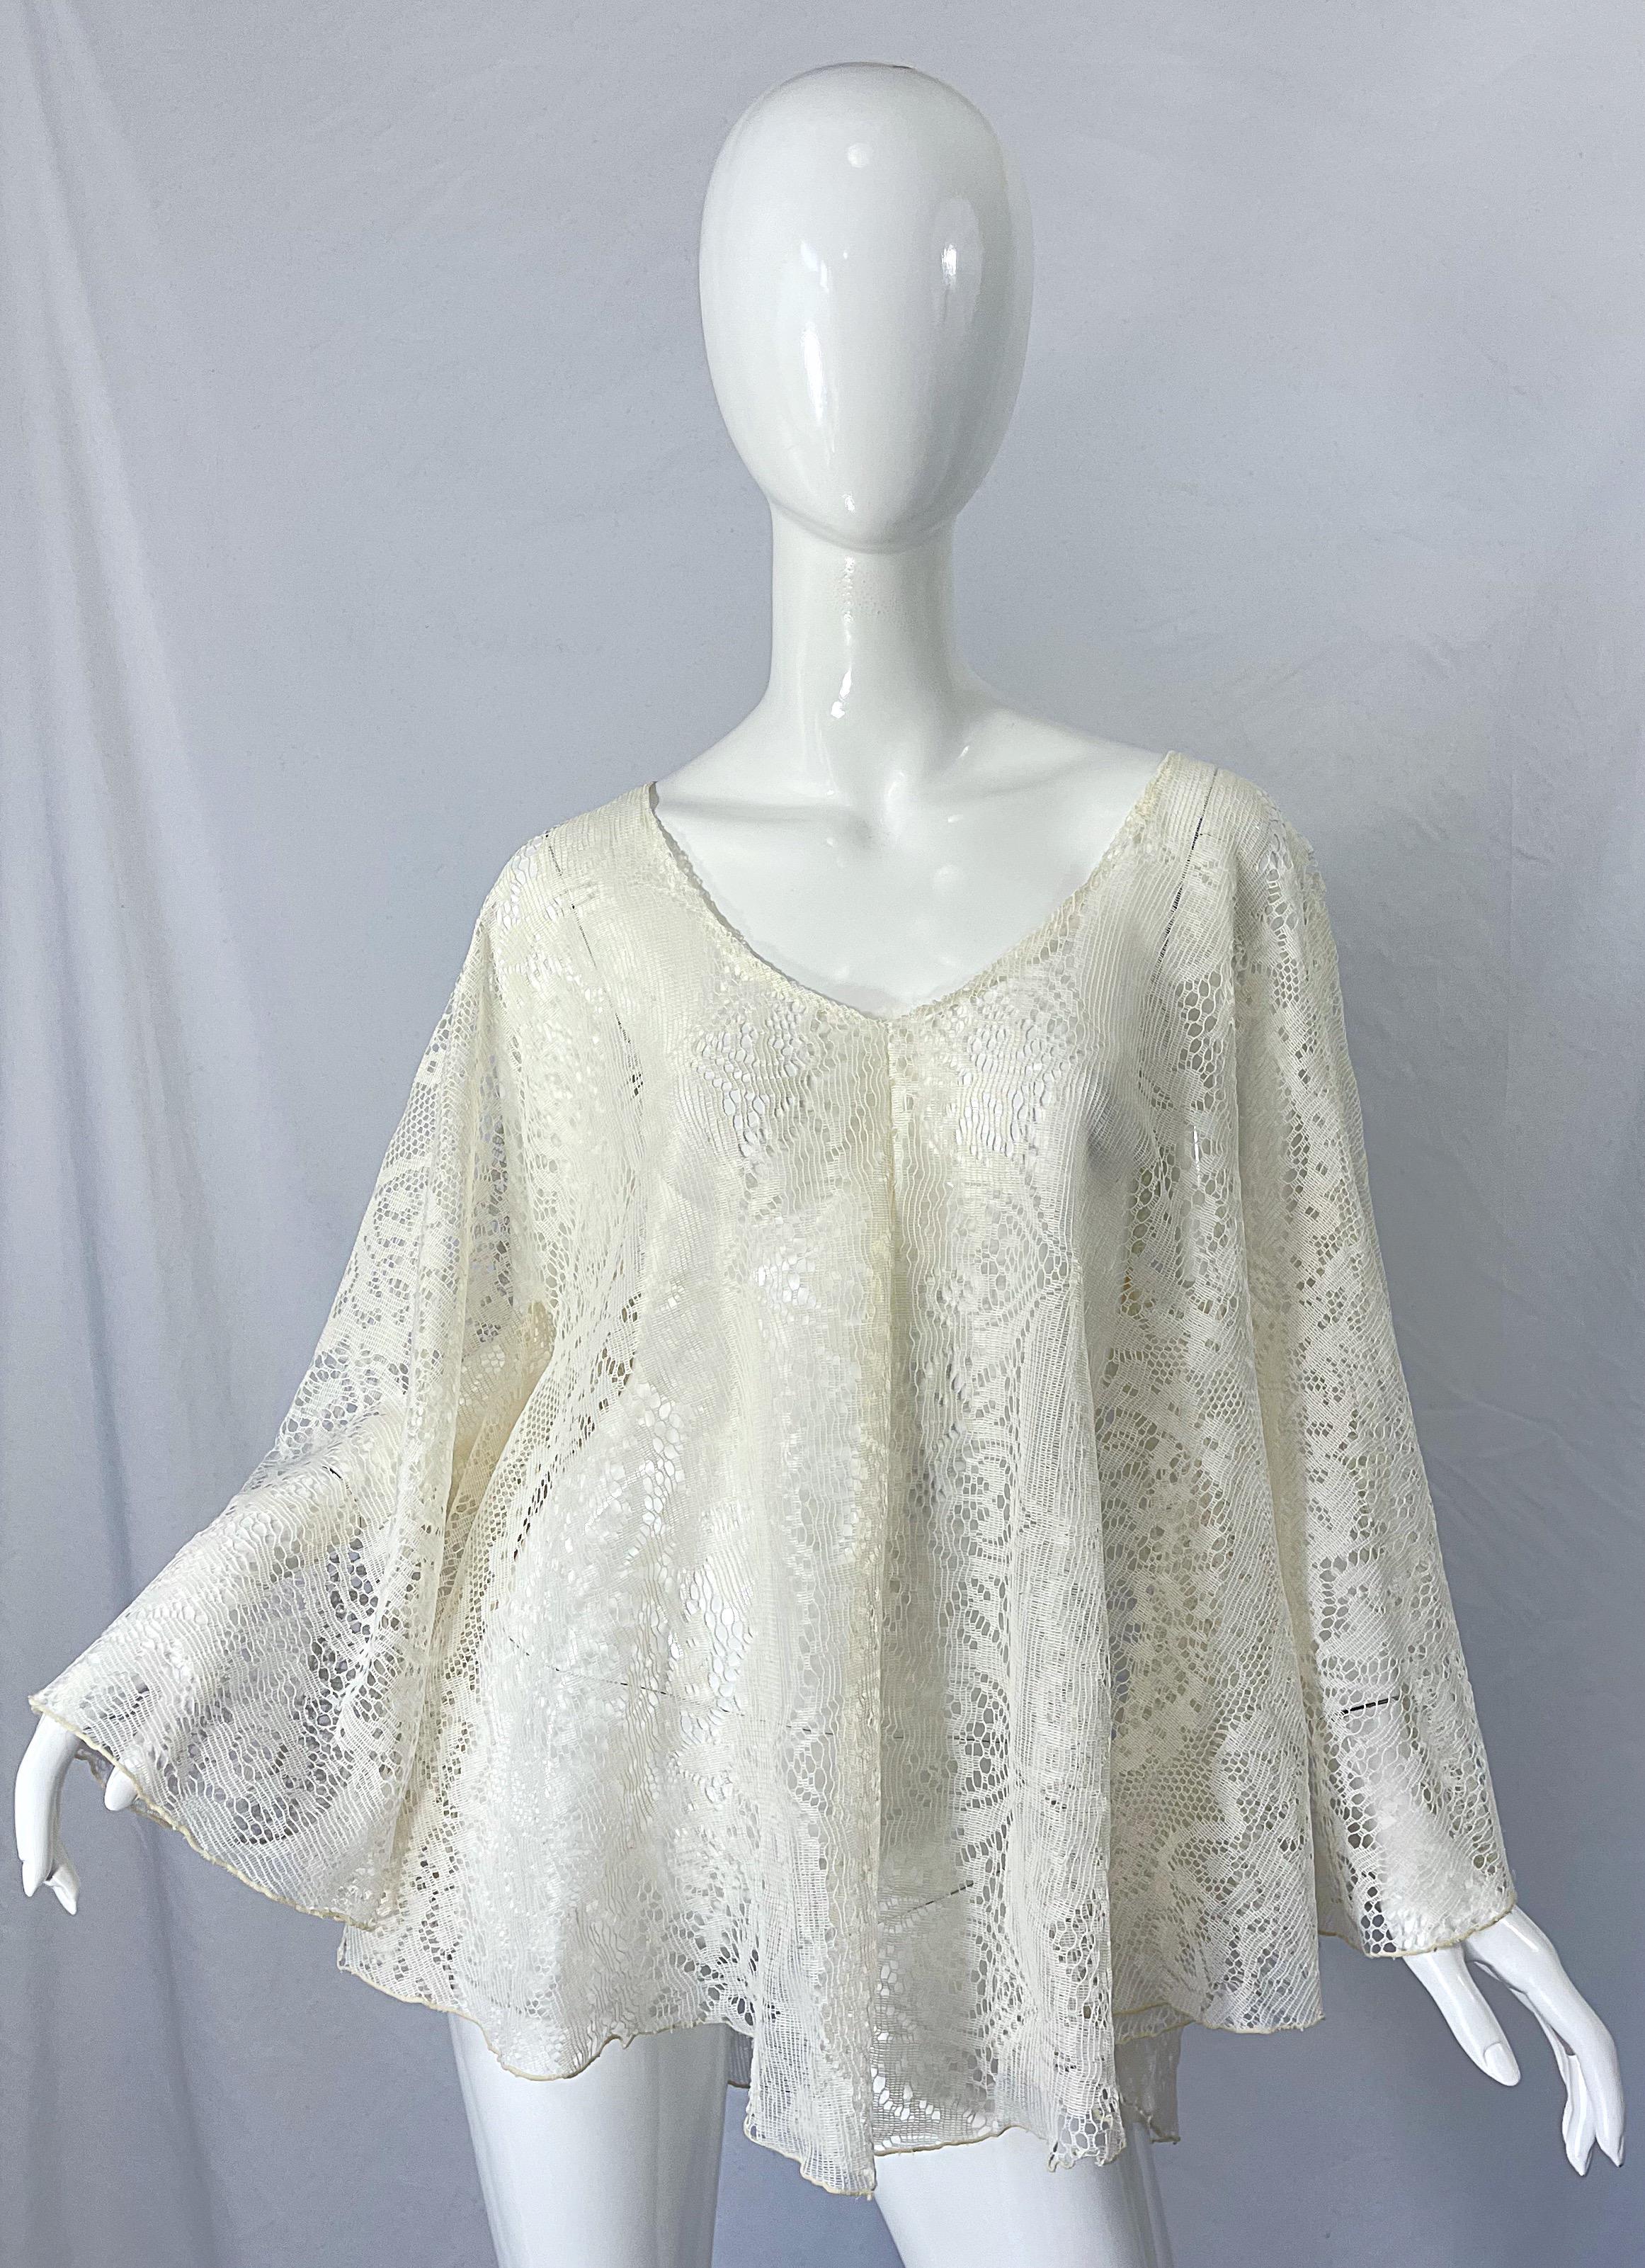 Chic 1970s ivory off - white lace kimono style bell sleeve poncho top ! Features silk lace with bell sleeves. At first, I thought this was a poncho. It is light and airy, and great layered or as a swimsuit cover-up. Simply slips over the head.
In